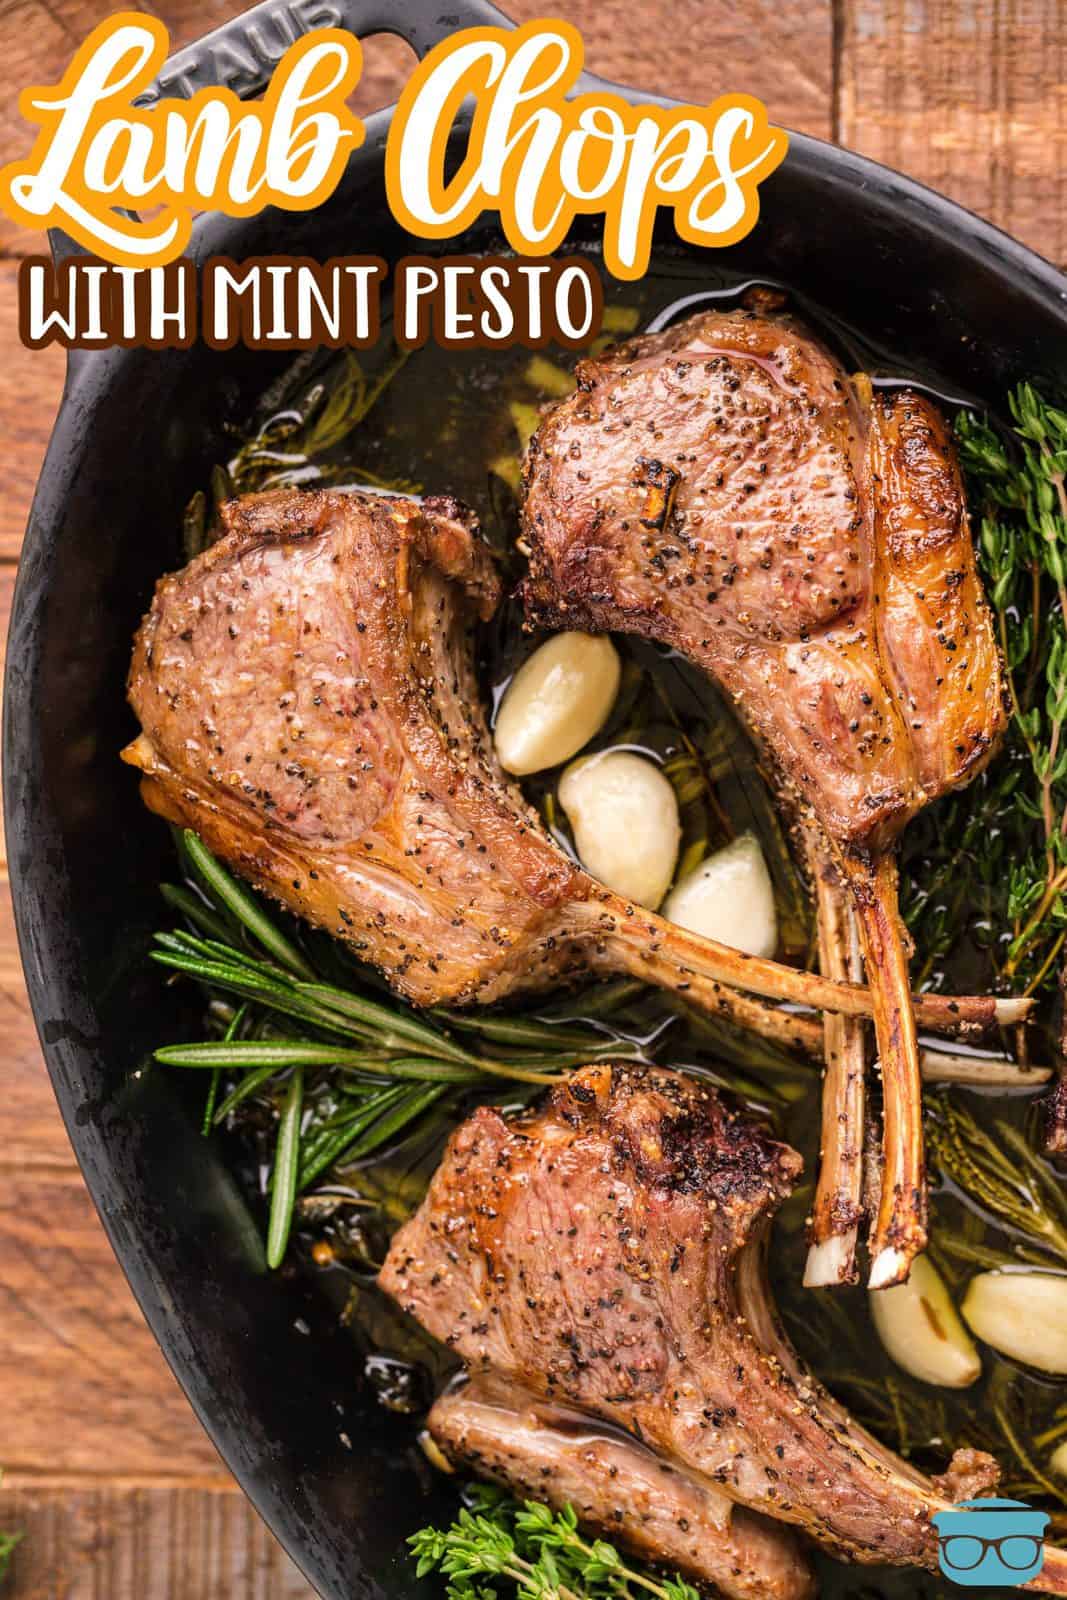 Pinterest image of Lamb Chops with Mint Pesto in baking dish overhead.